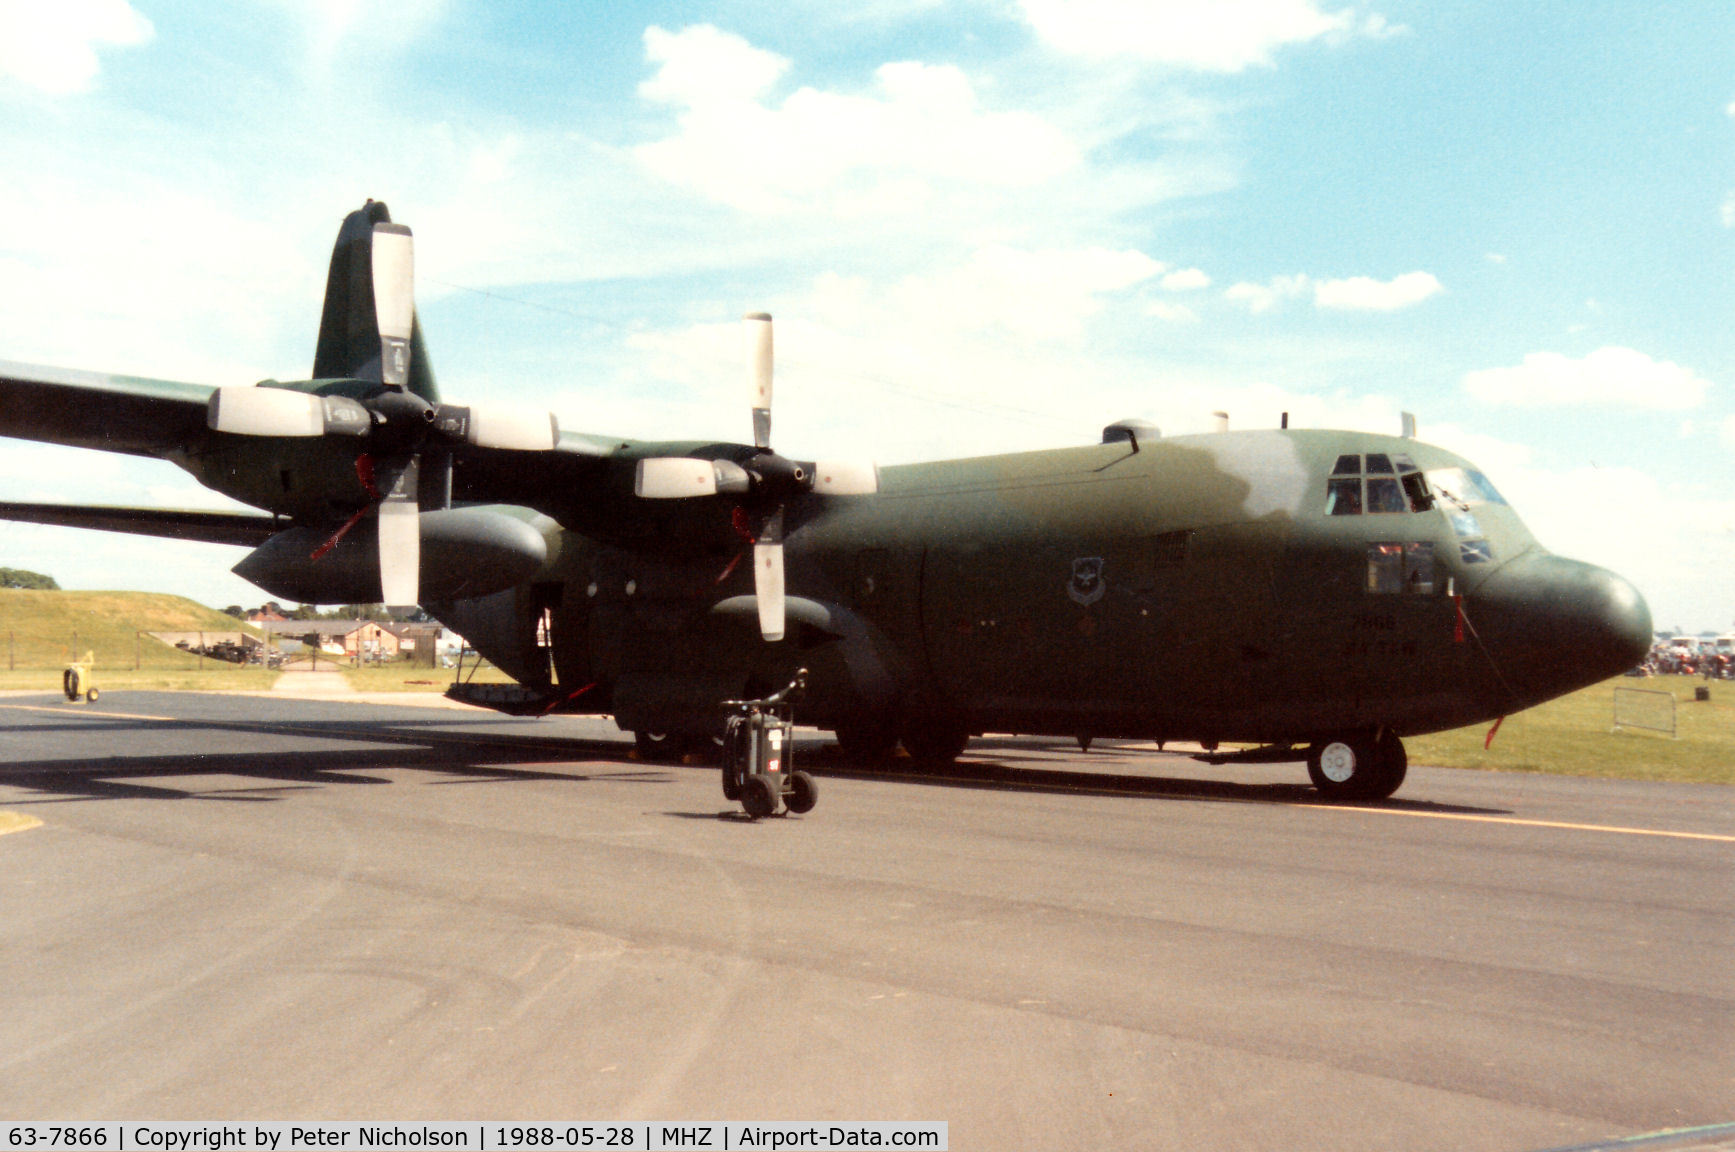 63-7866, 1963 Lockheed C-130E Hercules C/N 382-3936, Another view of the C-130E Hercules of the 314th Tactical Airlift Wing on display at the 1988 RAF Mildenhall Air Fete.